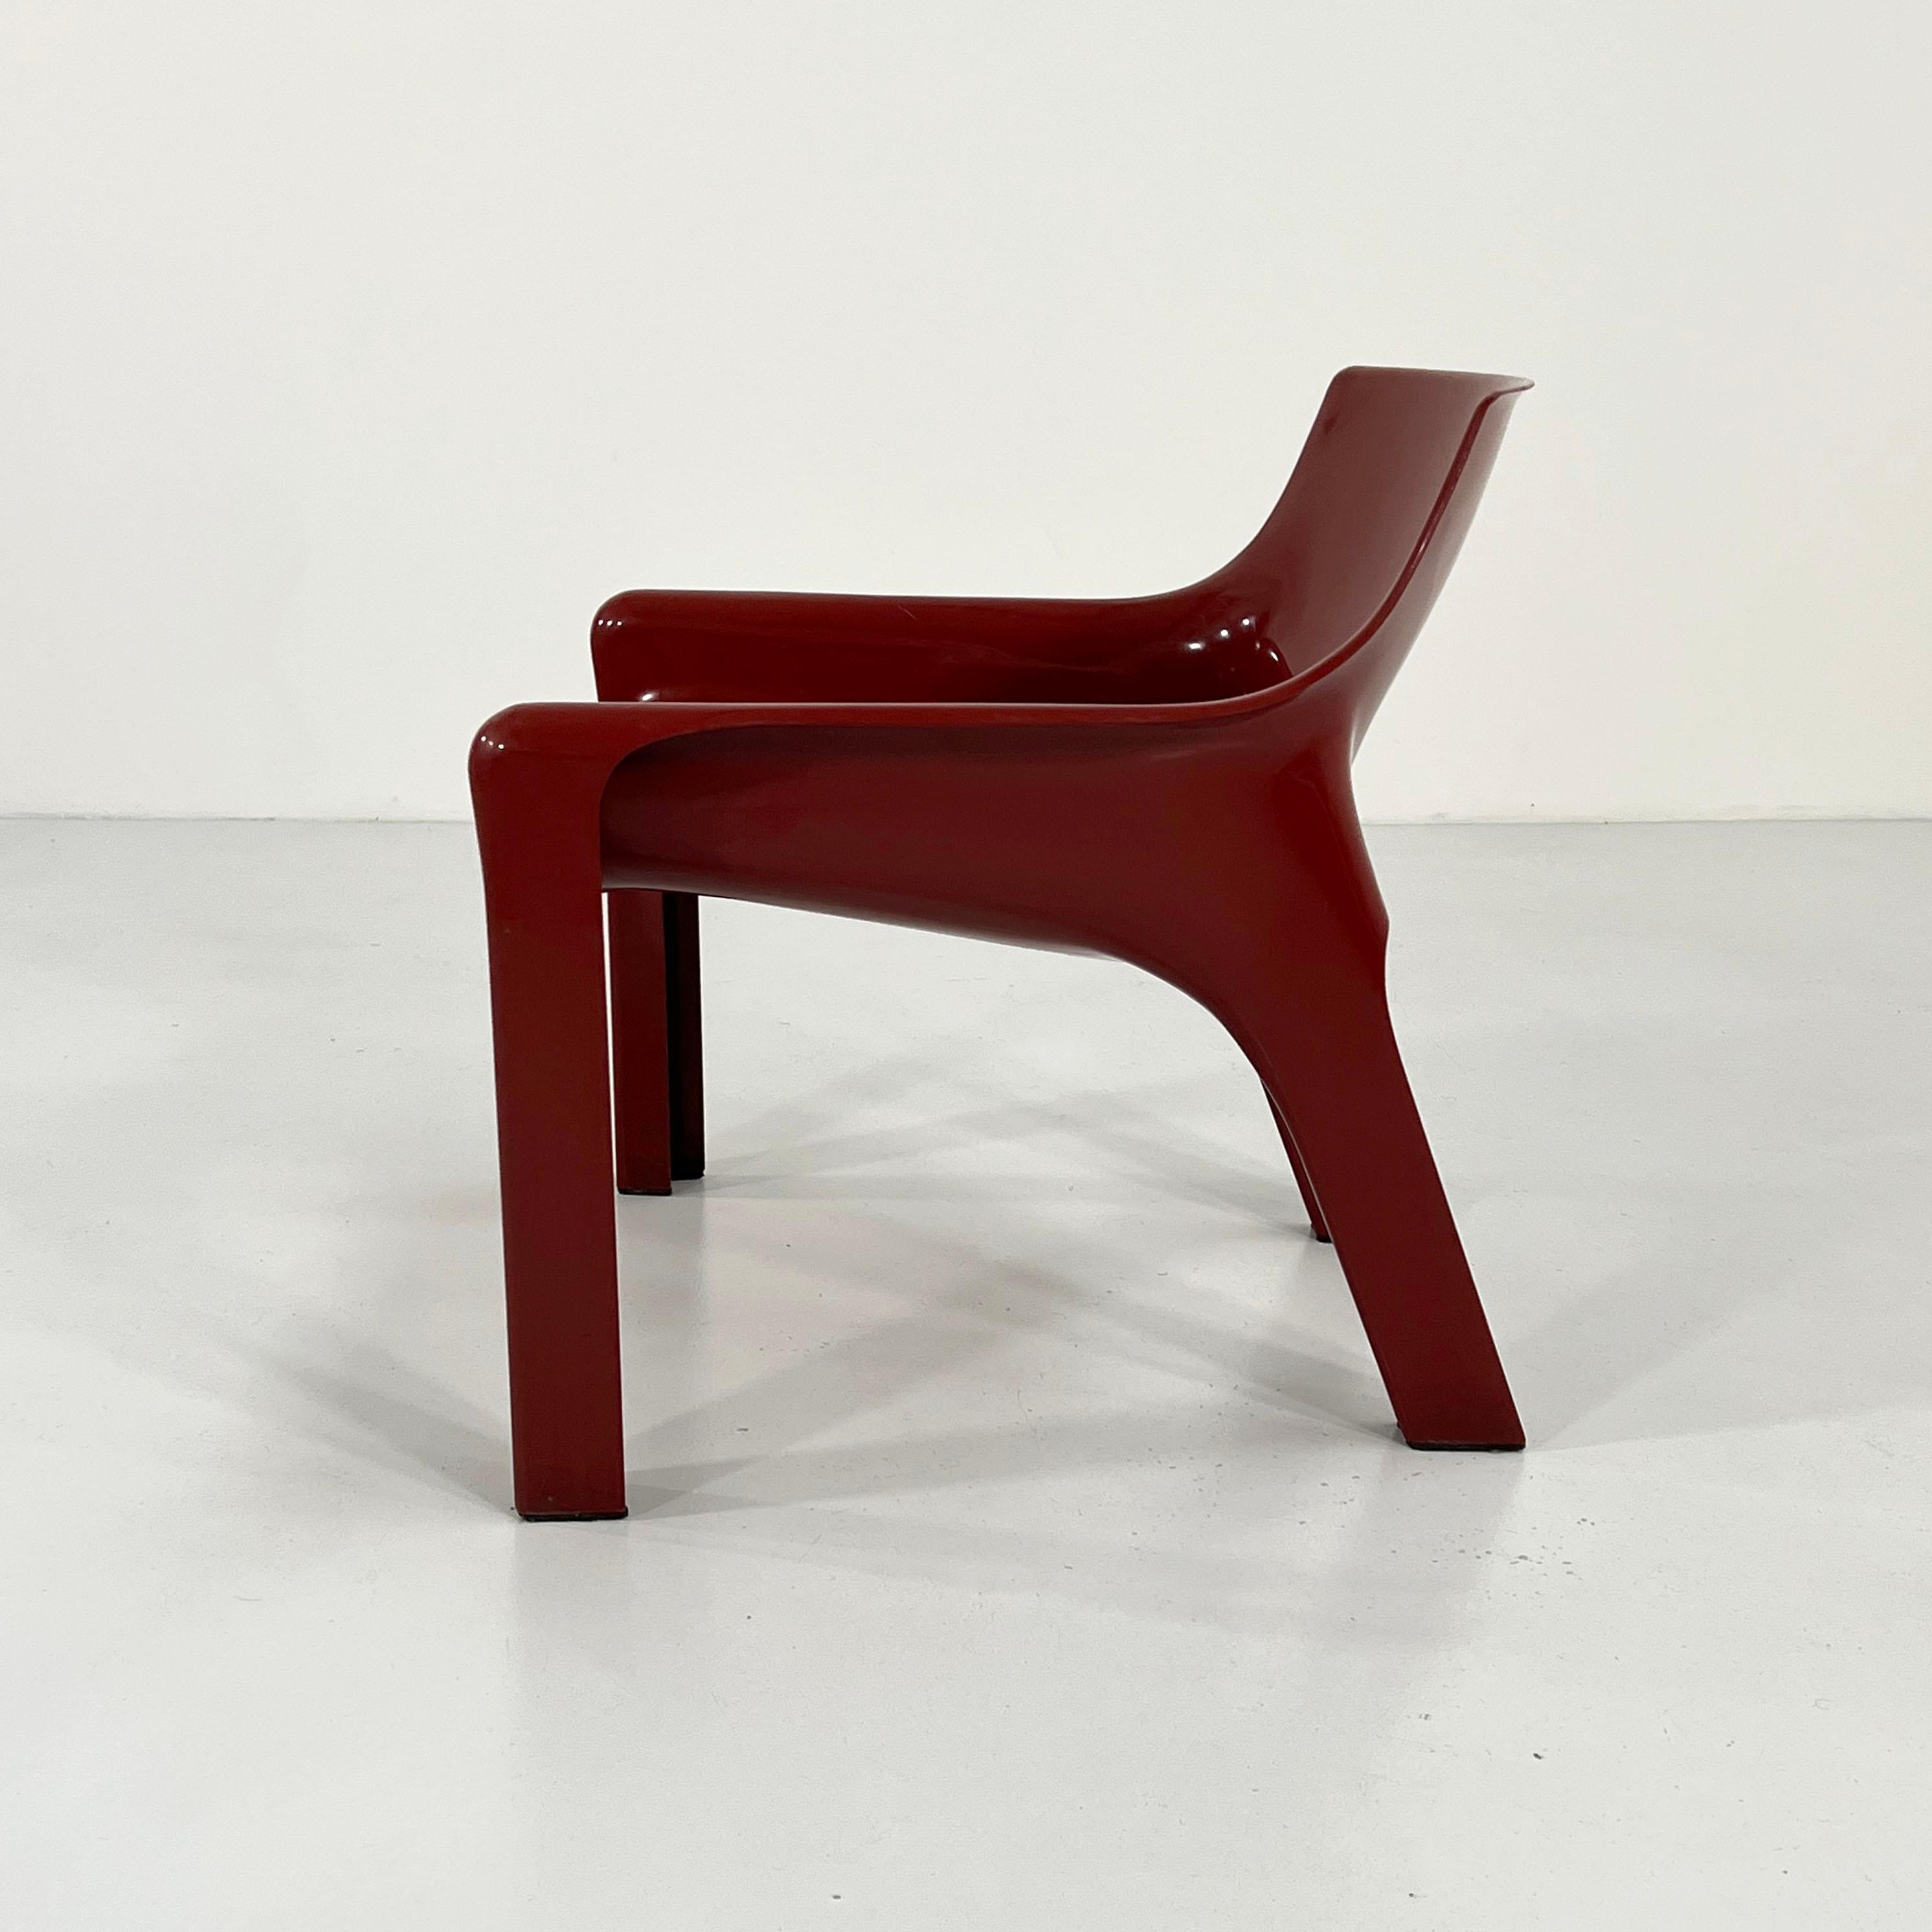 Late 20th Century Burgundy Vicario Lounge Chair by Vico Magistretti for Artemide, 1970s